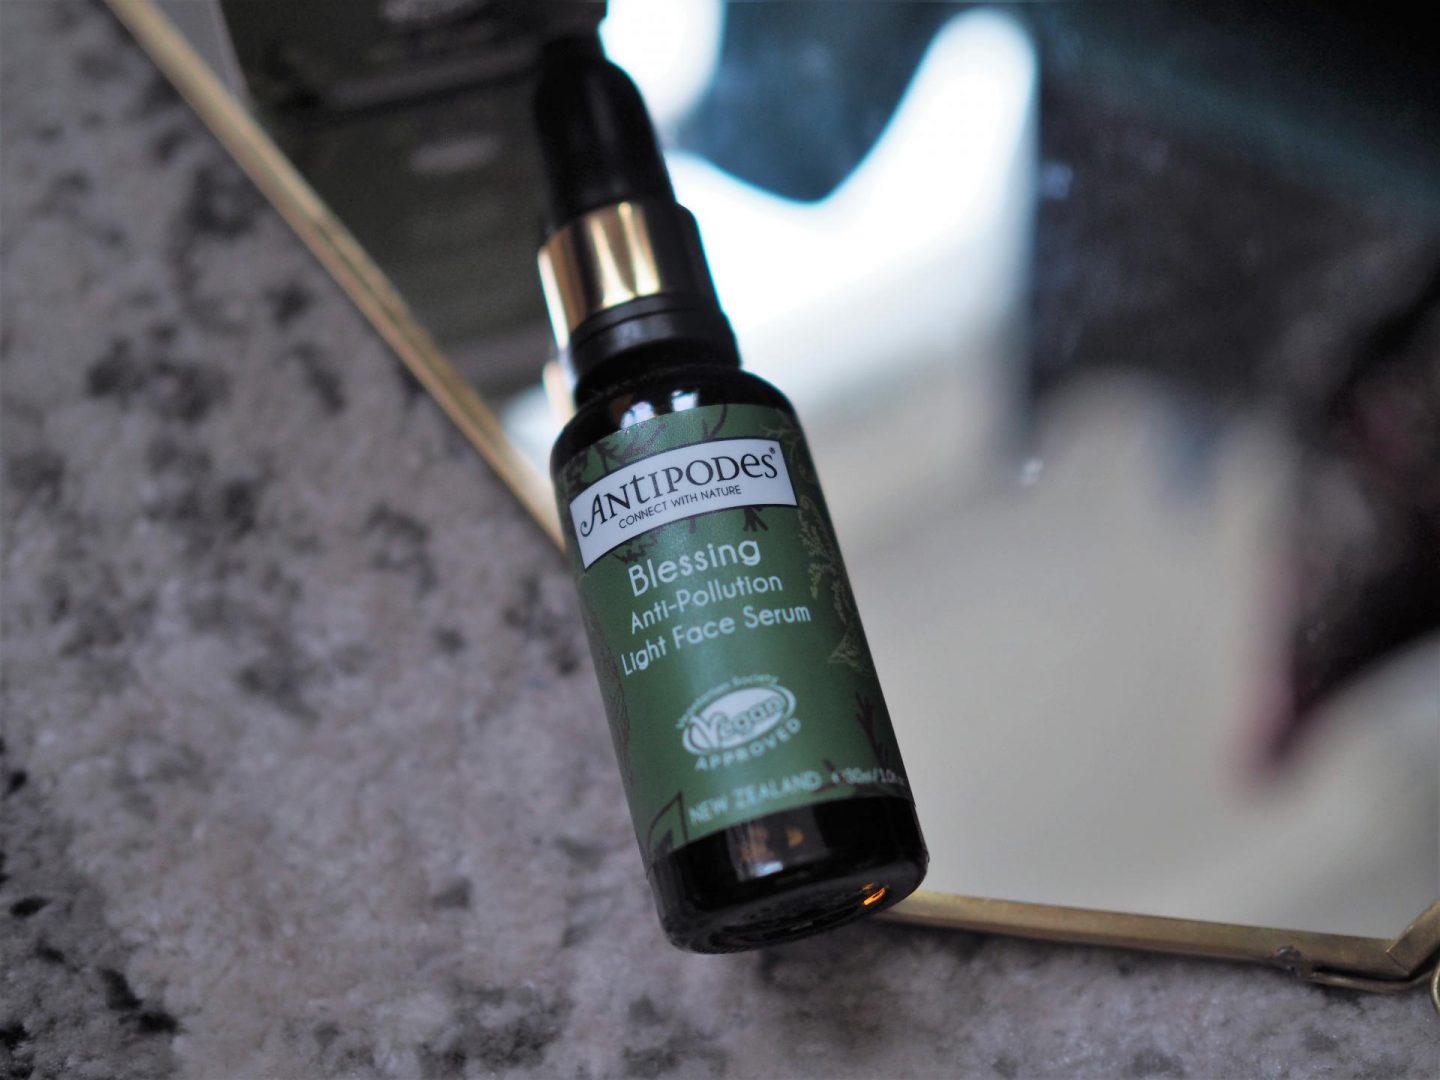 Antipodes Blessing Anti-Pollution Light Face Serum